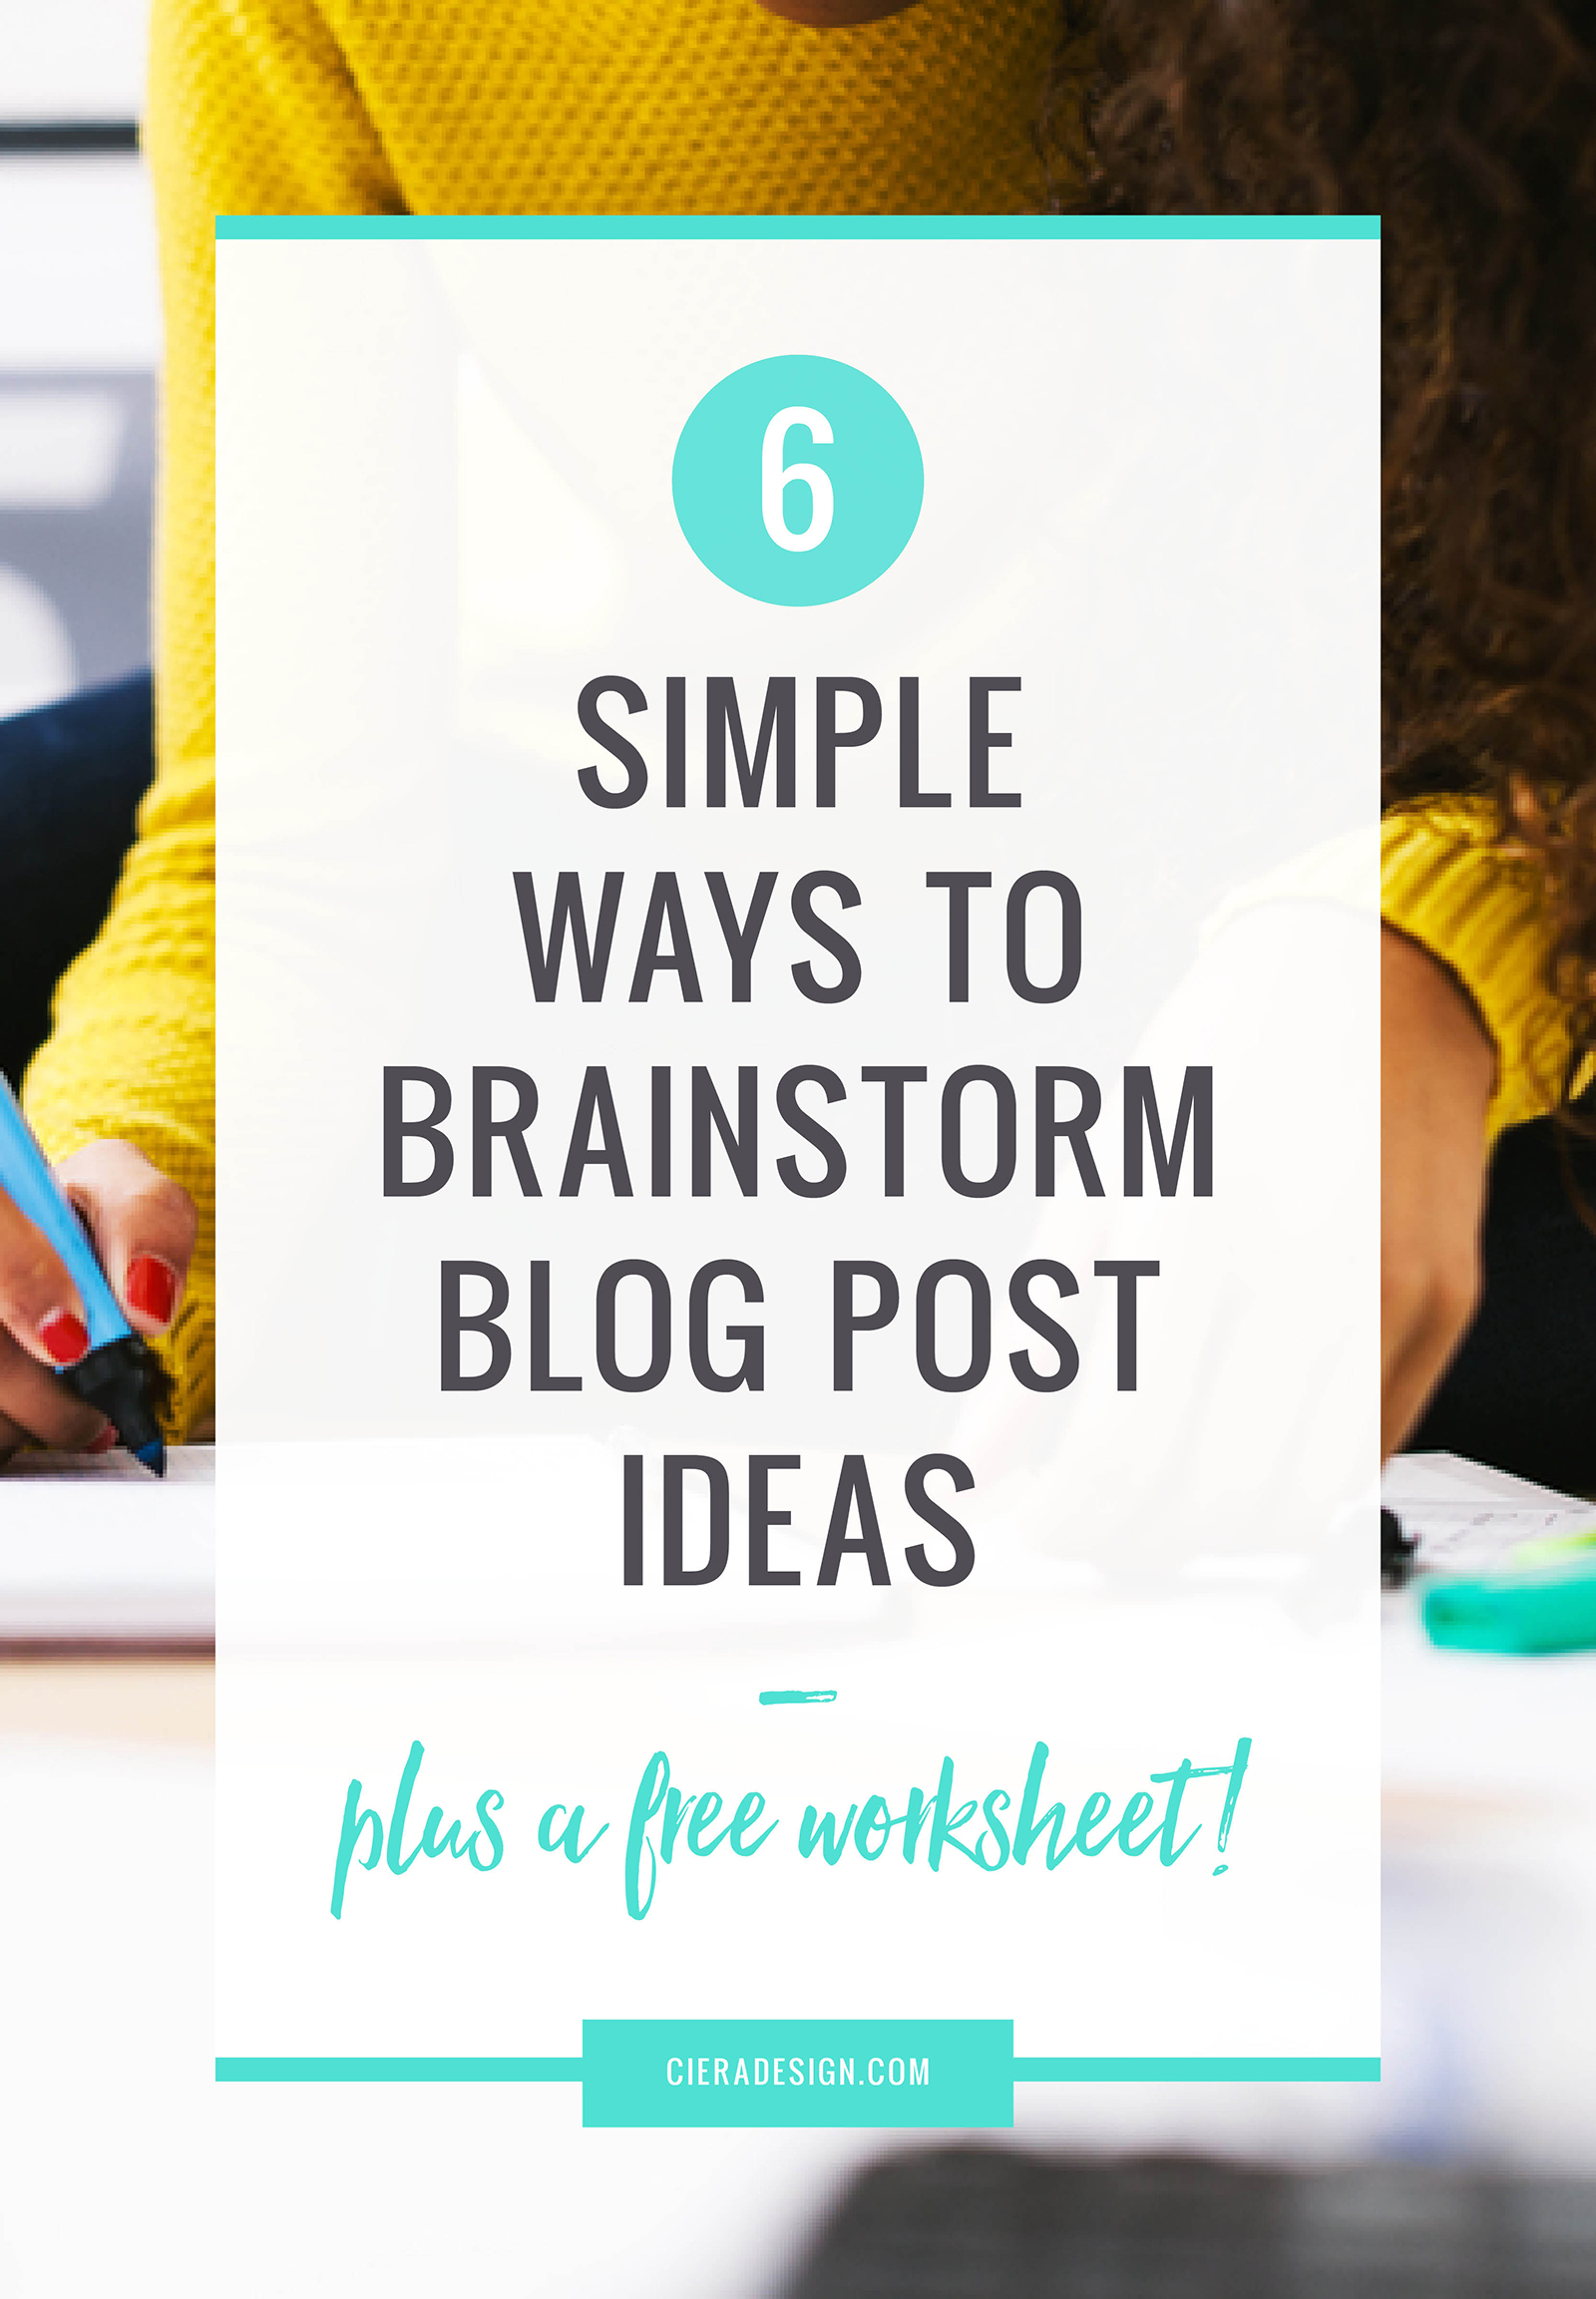 Download This Free Worksheet to Help You Brainstorm Blog Post Ideas